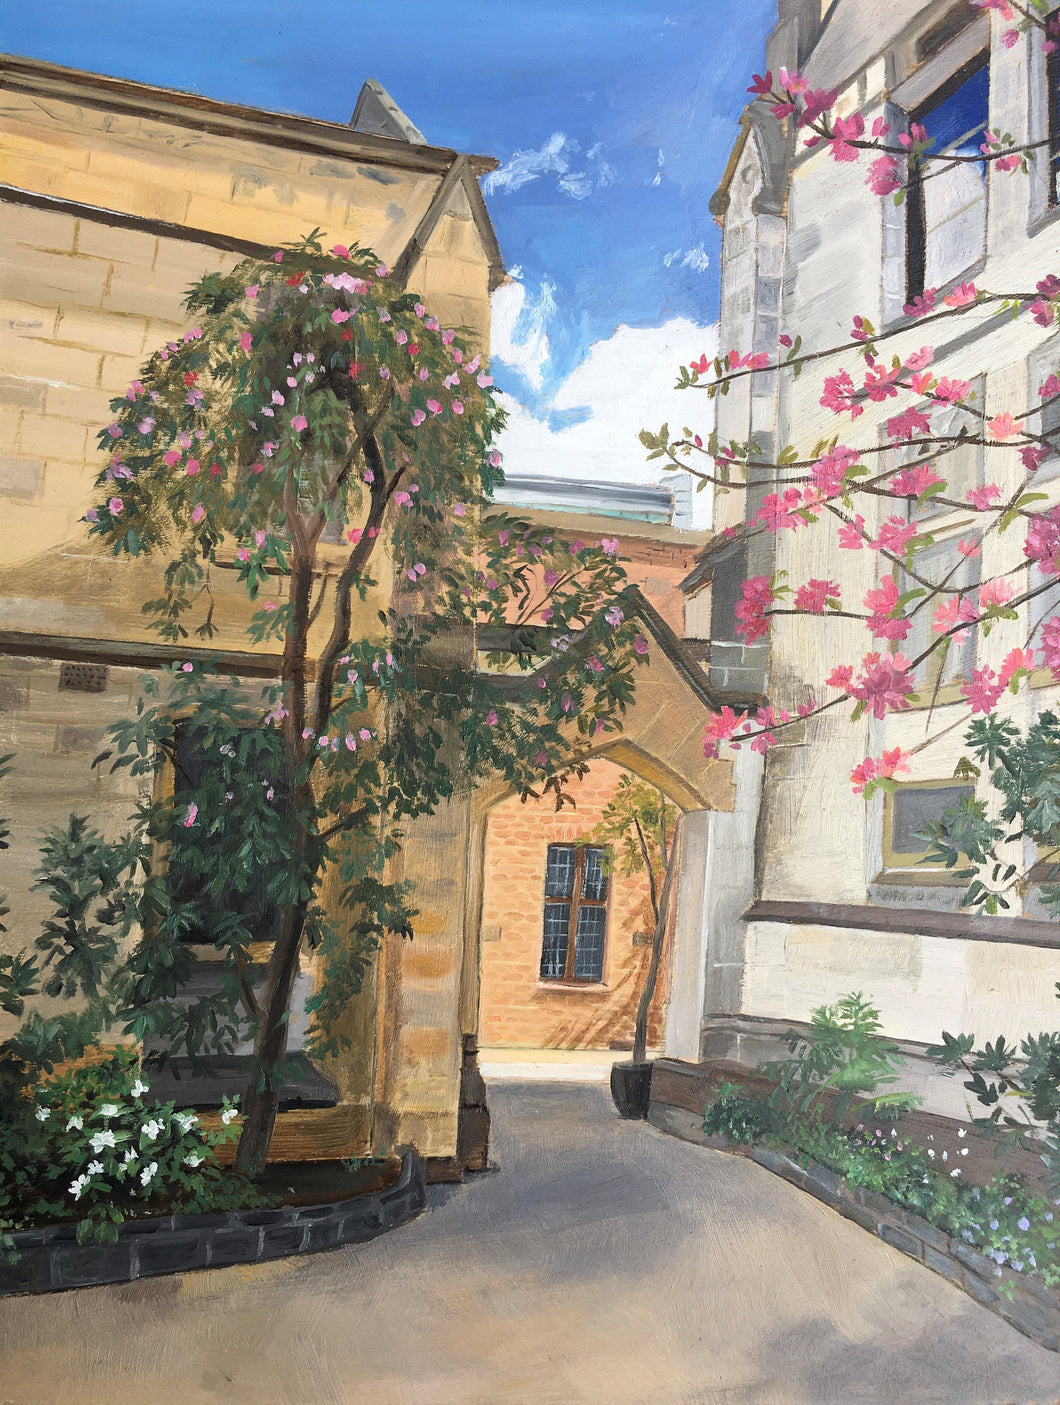 Cussonia court, early spring - Limited edition print